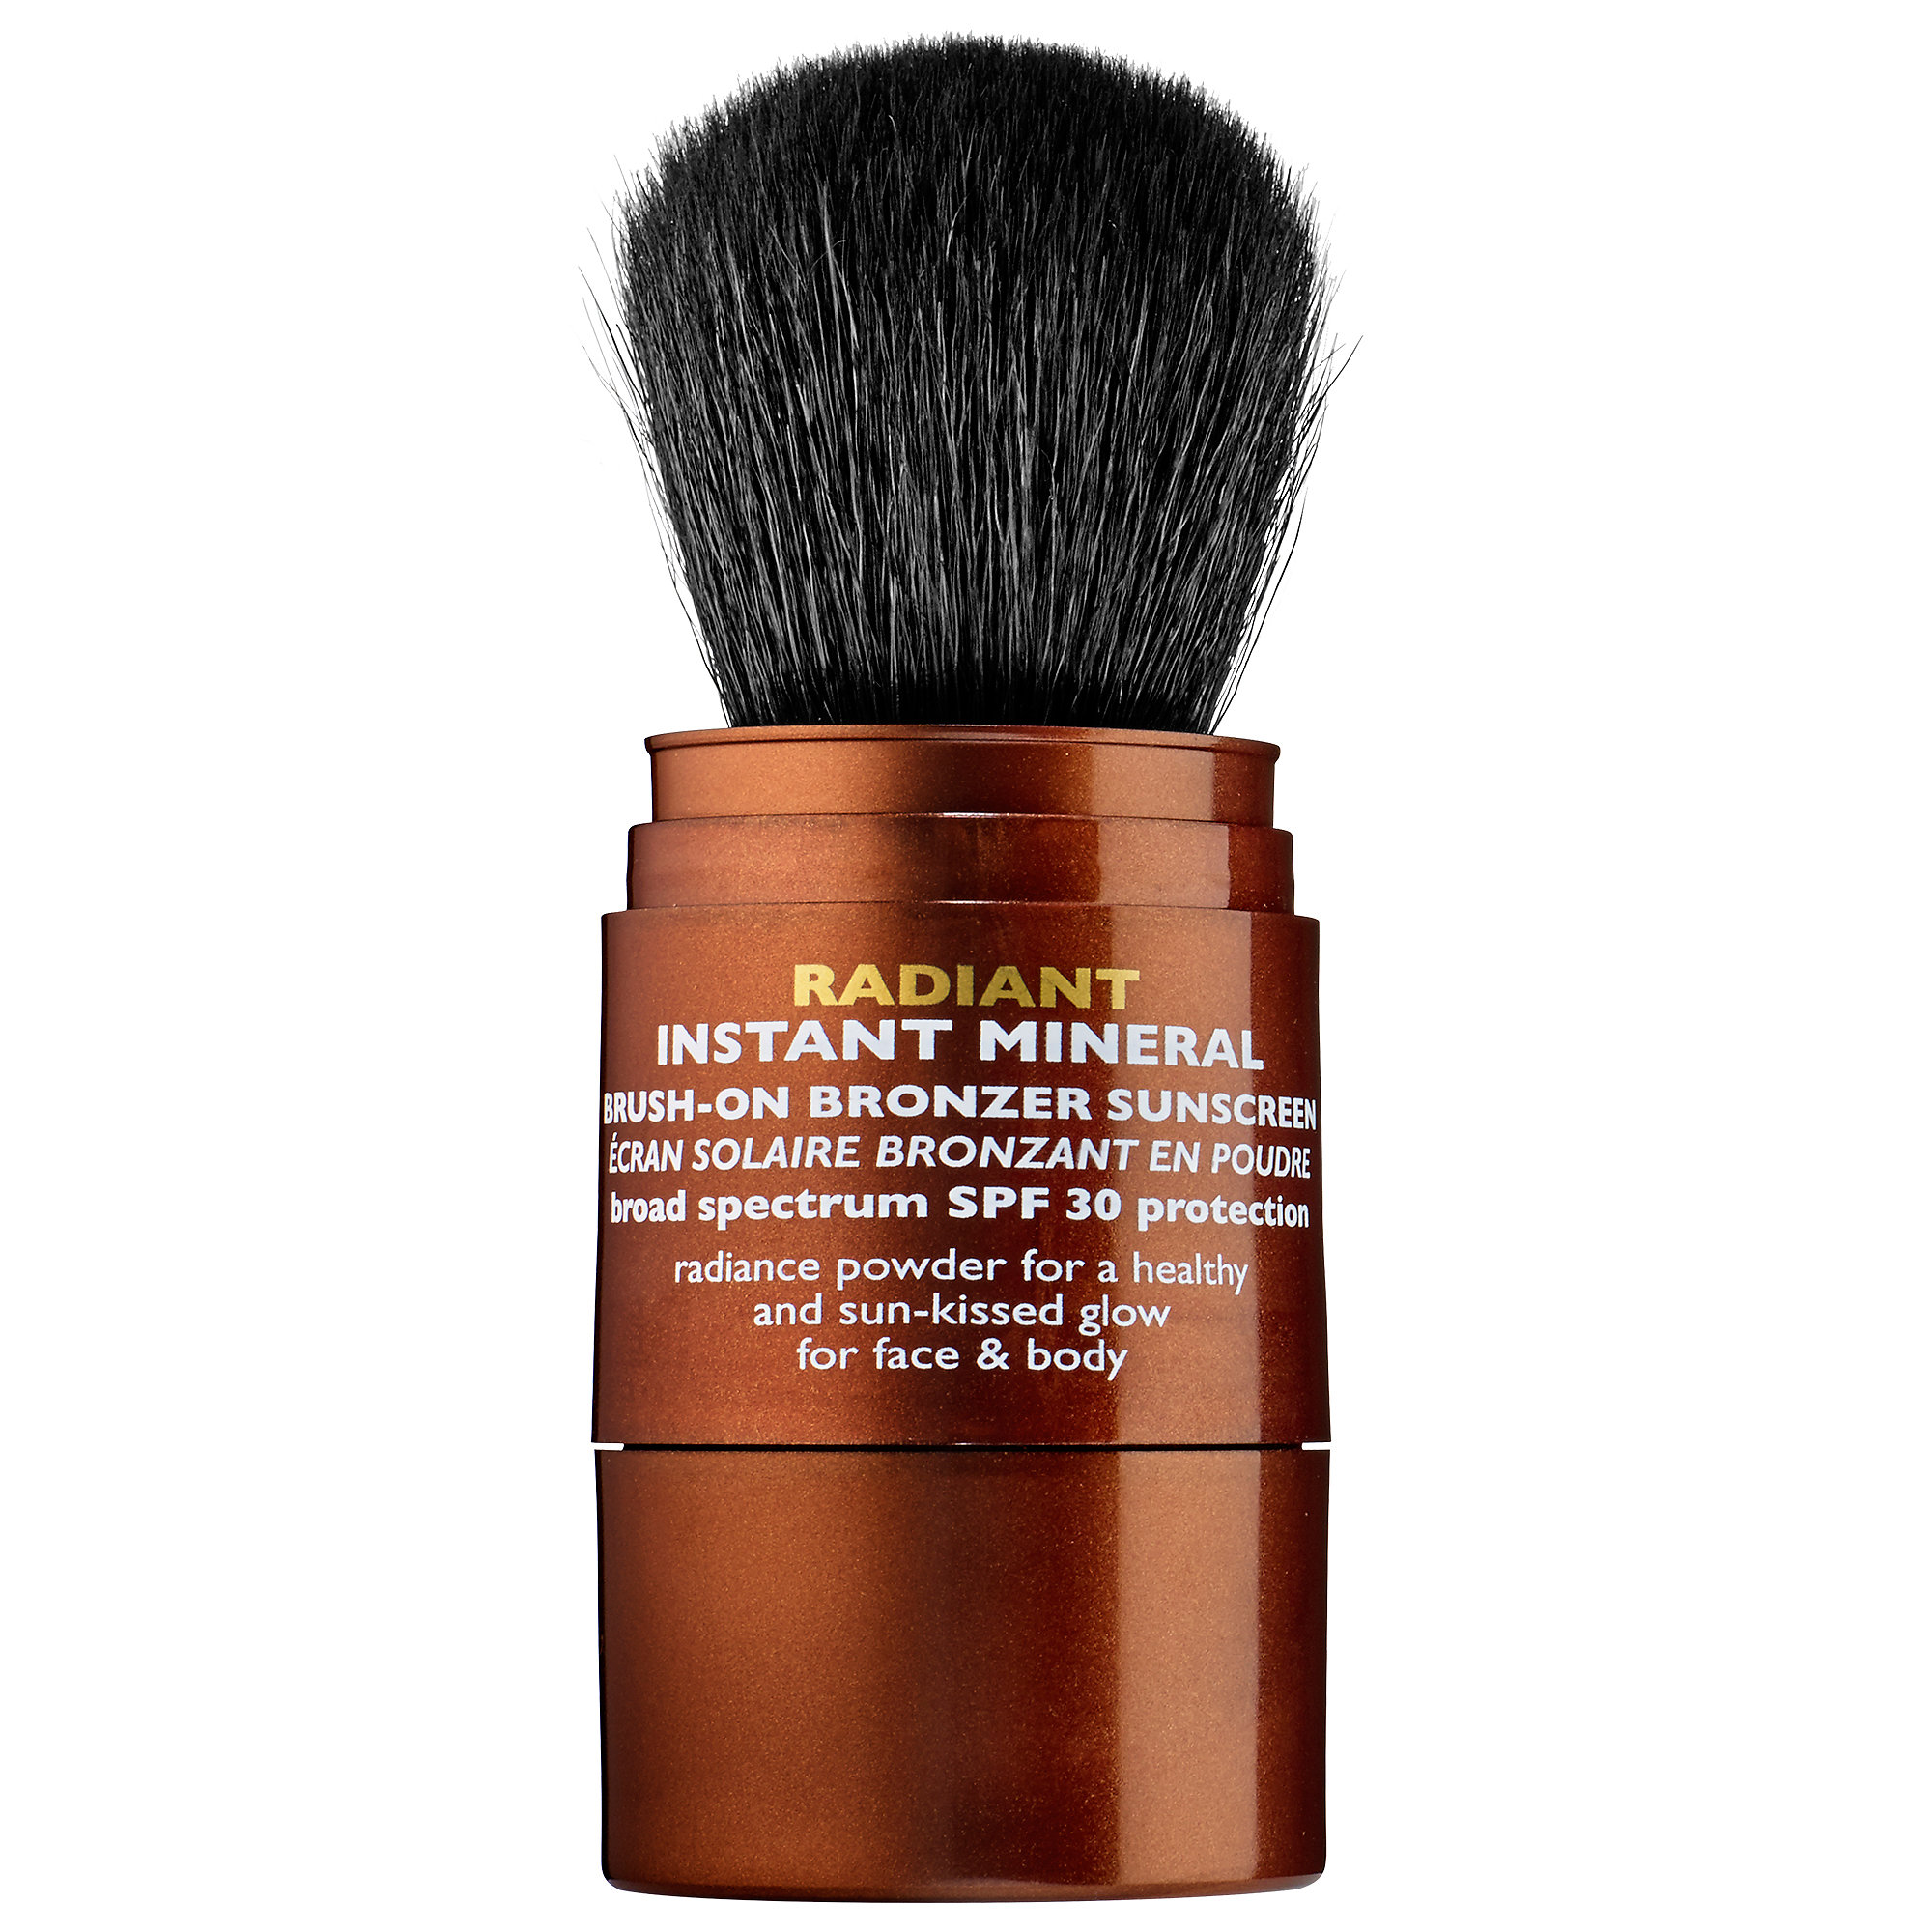 Peter Thomas Roth Radiant Instant Mineral Brush-On Bronzer Sunscreen SPF 30 ($35)